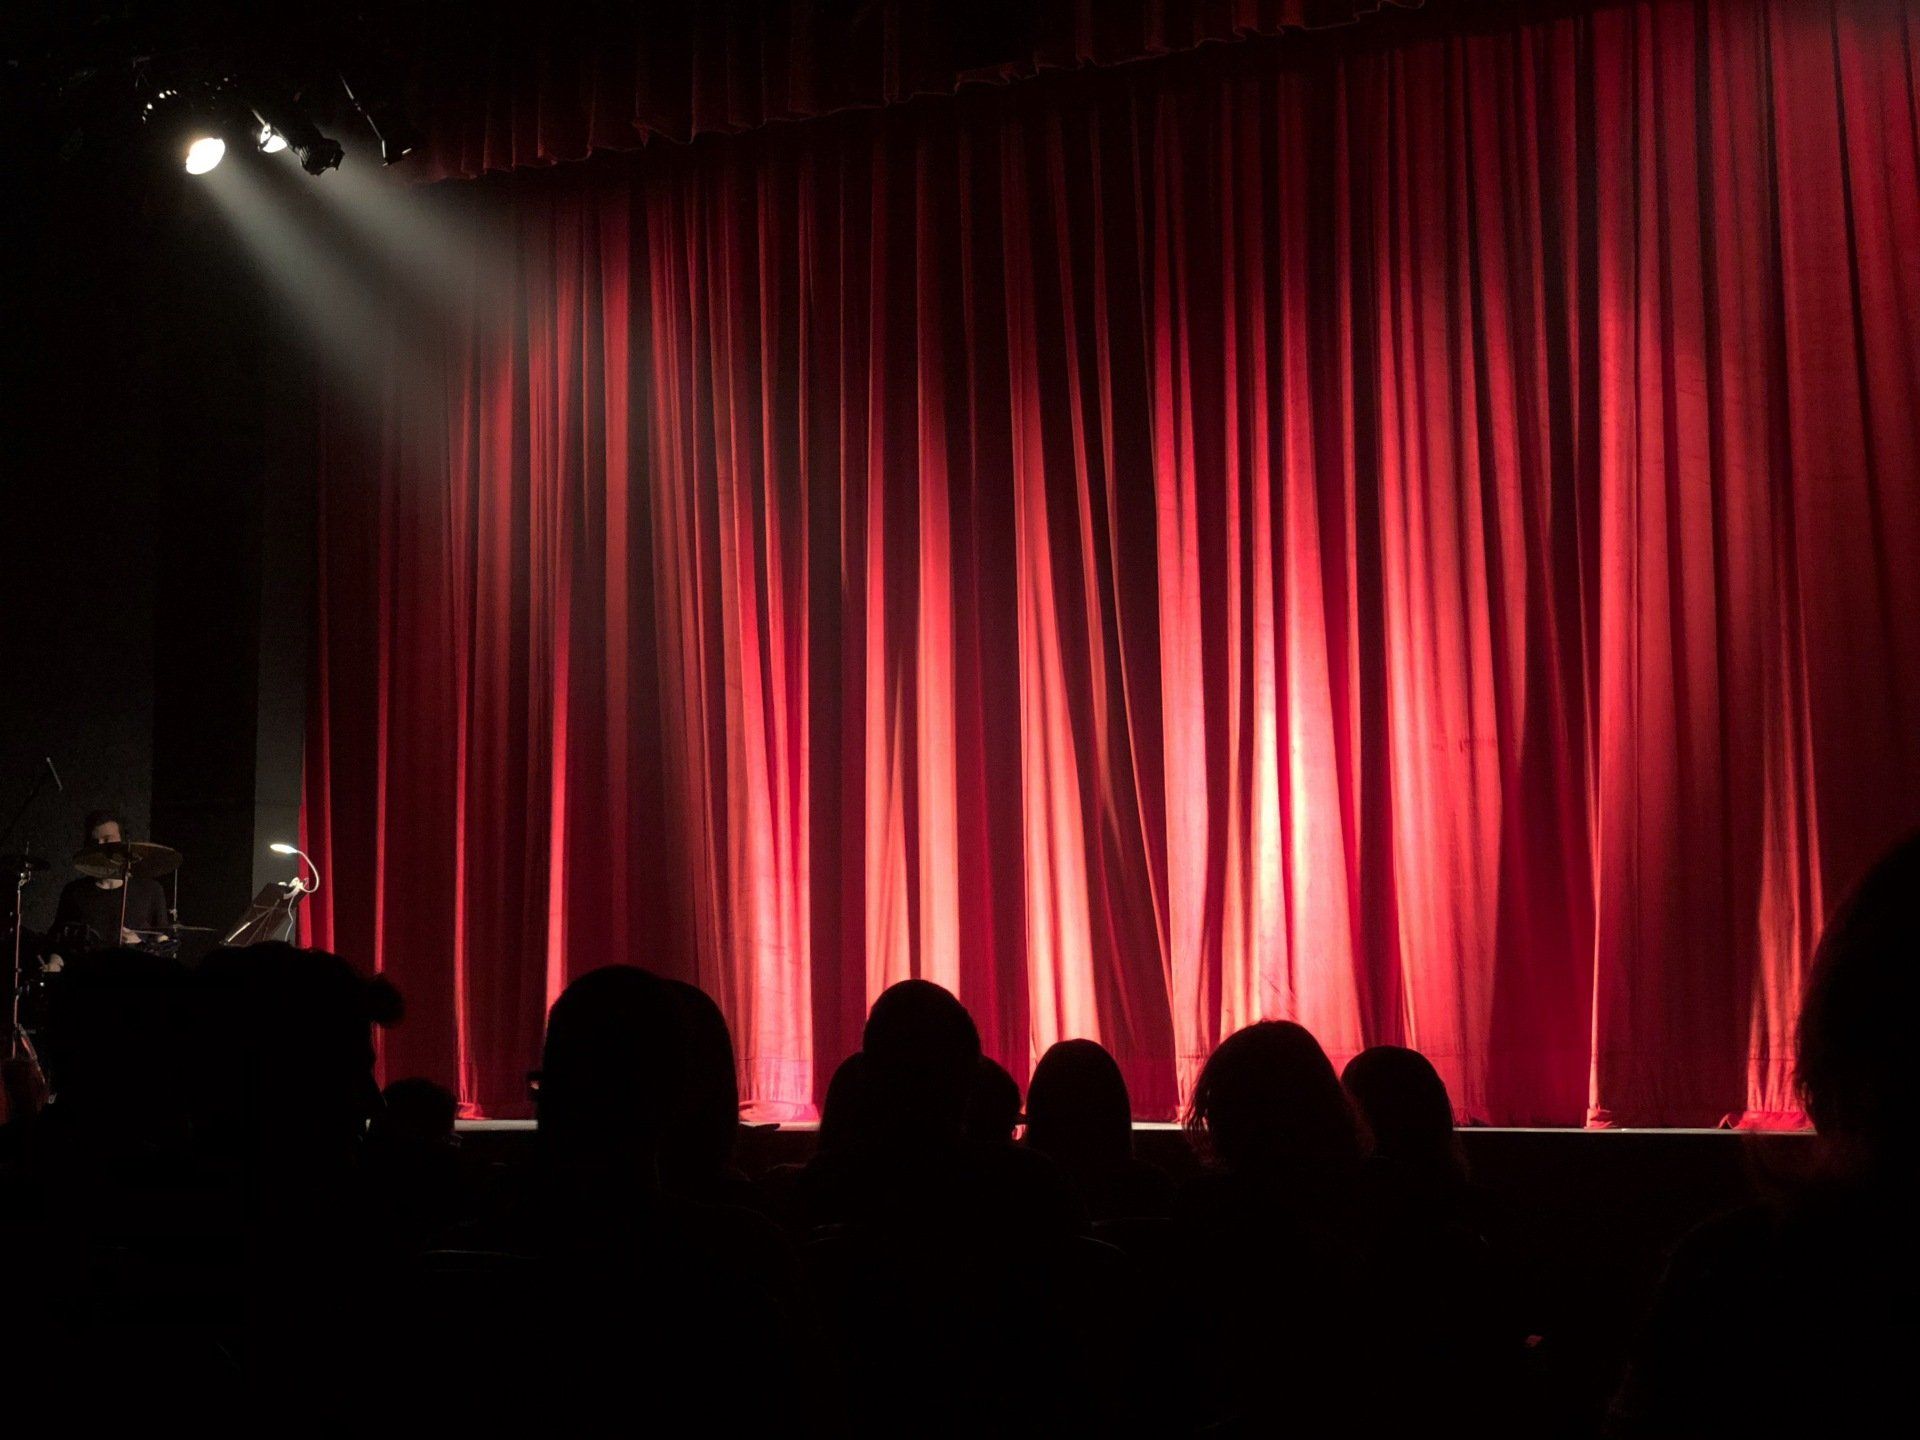 A group of people are sitting in front of a red curtain on a stage.